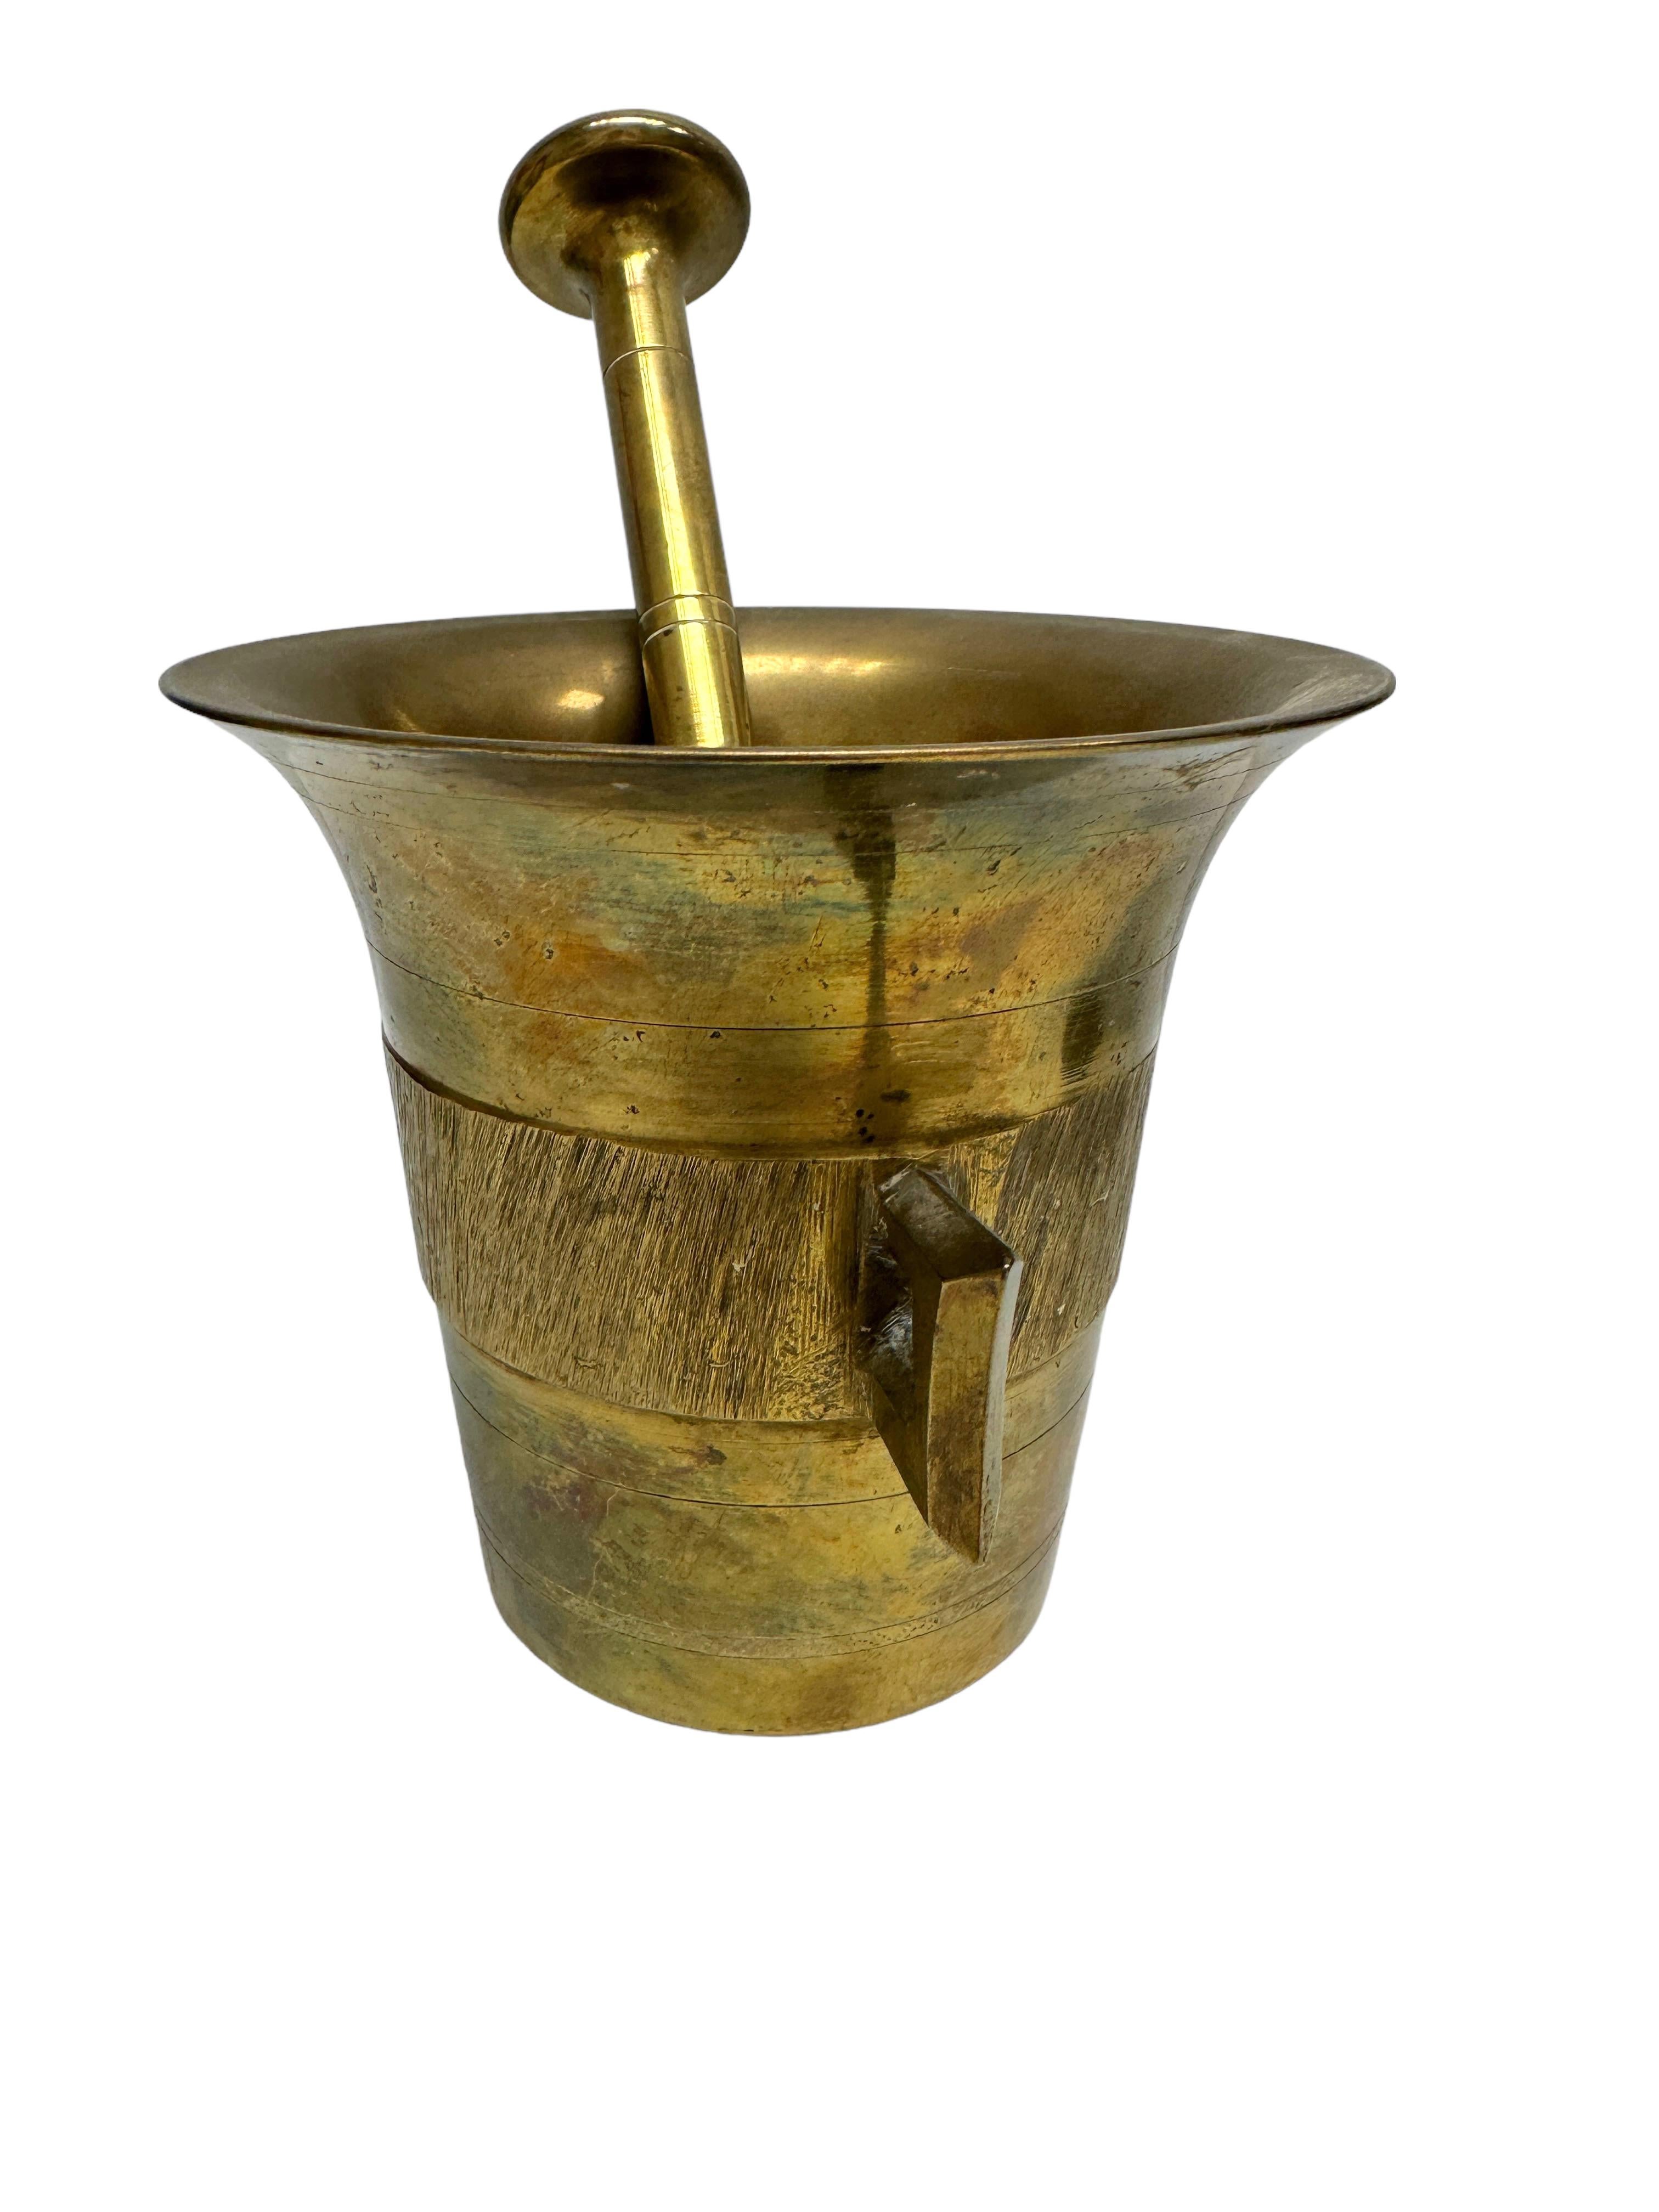 Offered is a beautiful antique solid brass mortar and pestle set. The mortar has a cylindrical shape with a flared mouth and two angular handles at the sides. The baton-shaped pestle has large knob ends at each side to effectively crush and/or grind